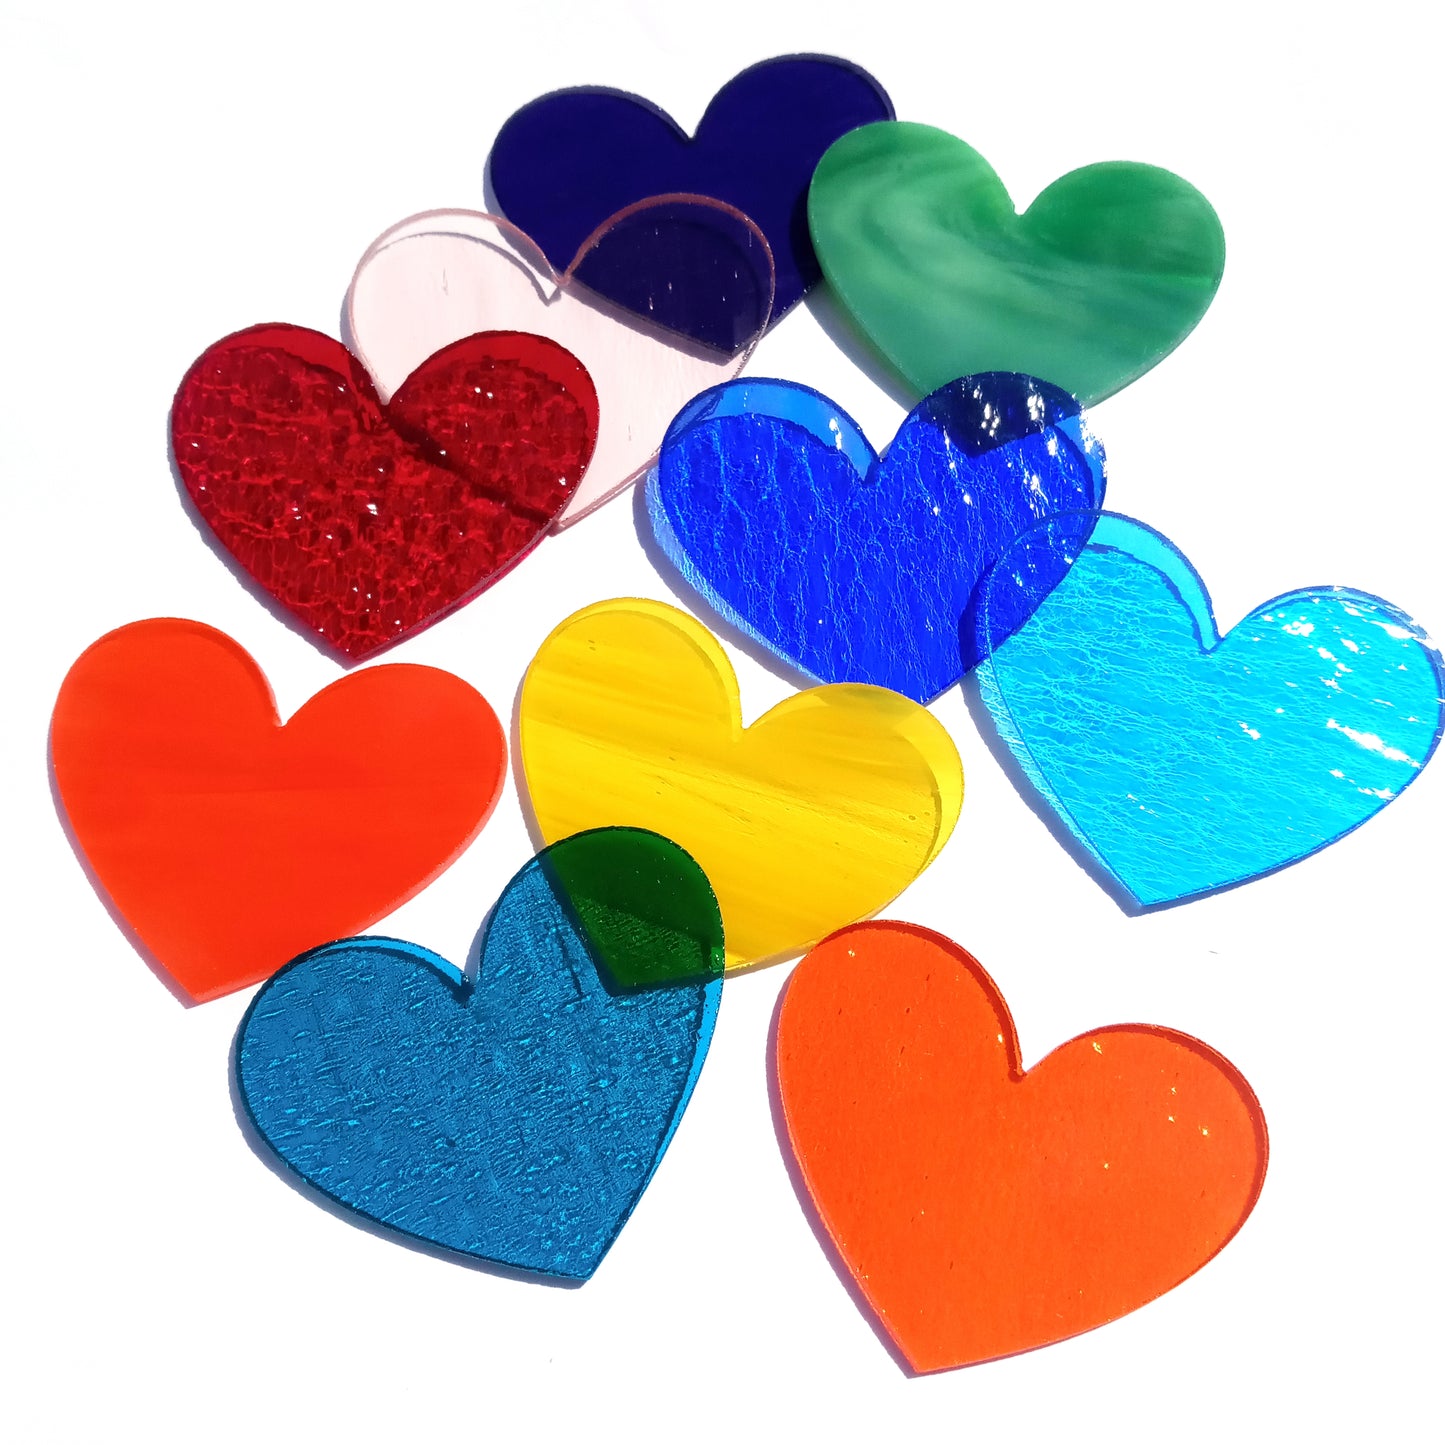 Precut Stained Glass Hearts, Assorted Colors, 2.5" Glass Hearts for Mosaics, Jewelry, Stained Glass